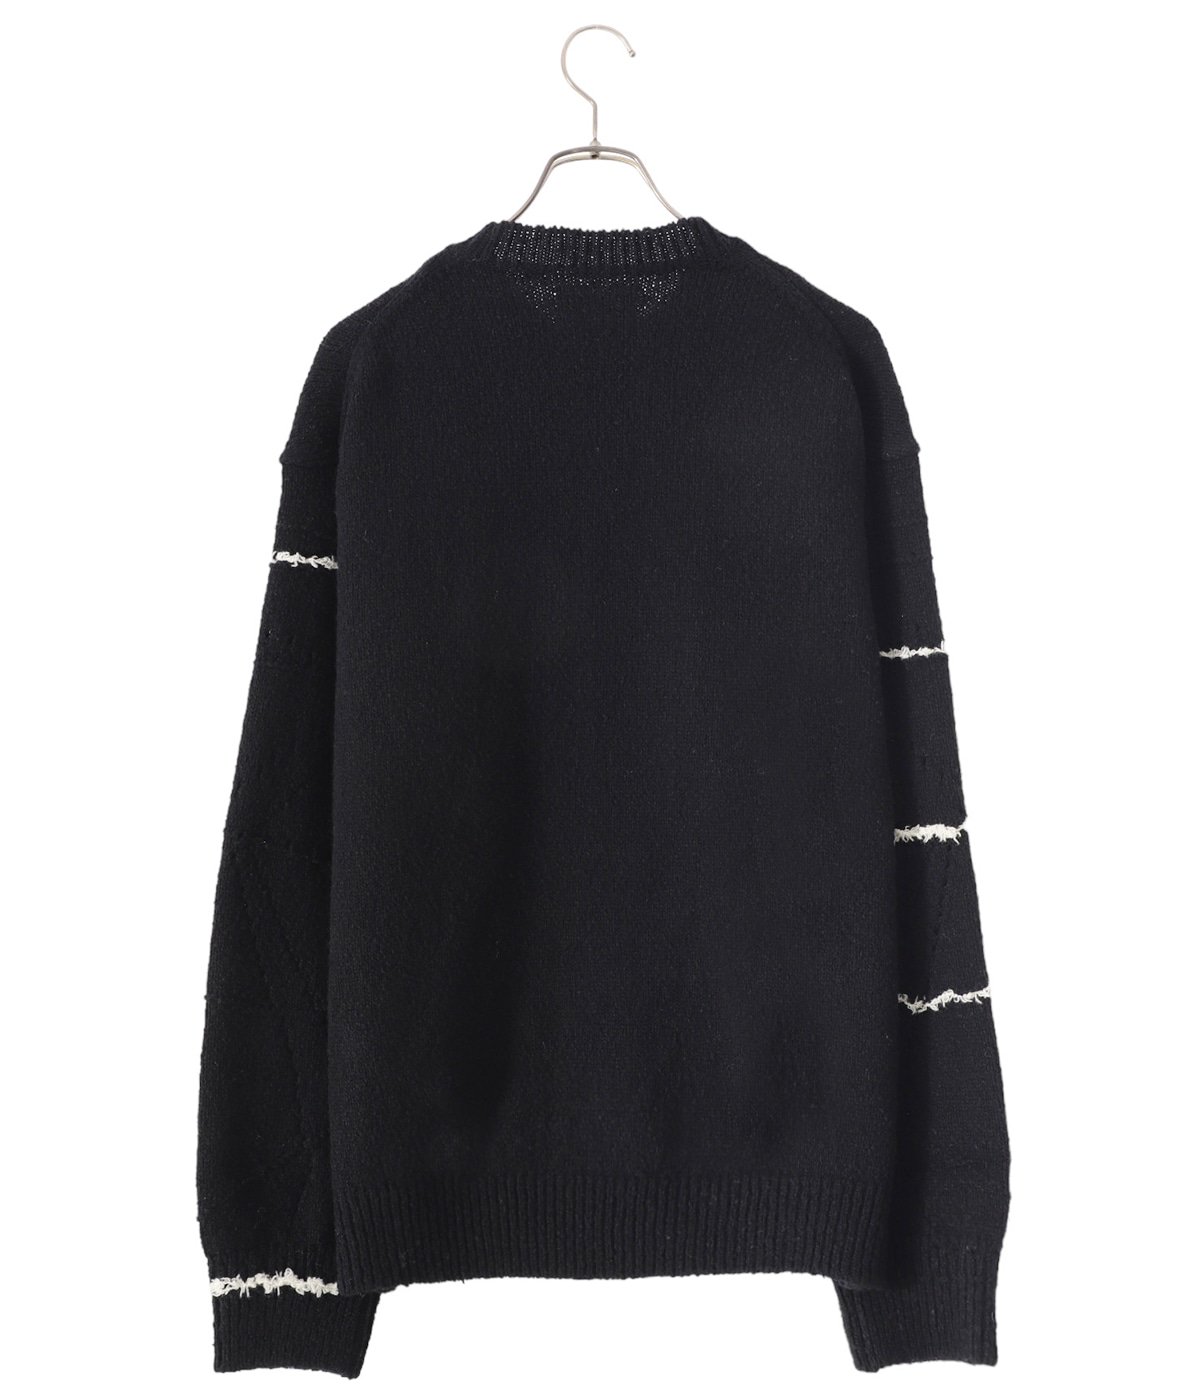 CONTINUOUS LINE EMBROIDERY SWEATER | YOKE(ヨーク) / トップス 